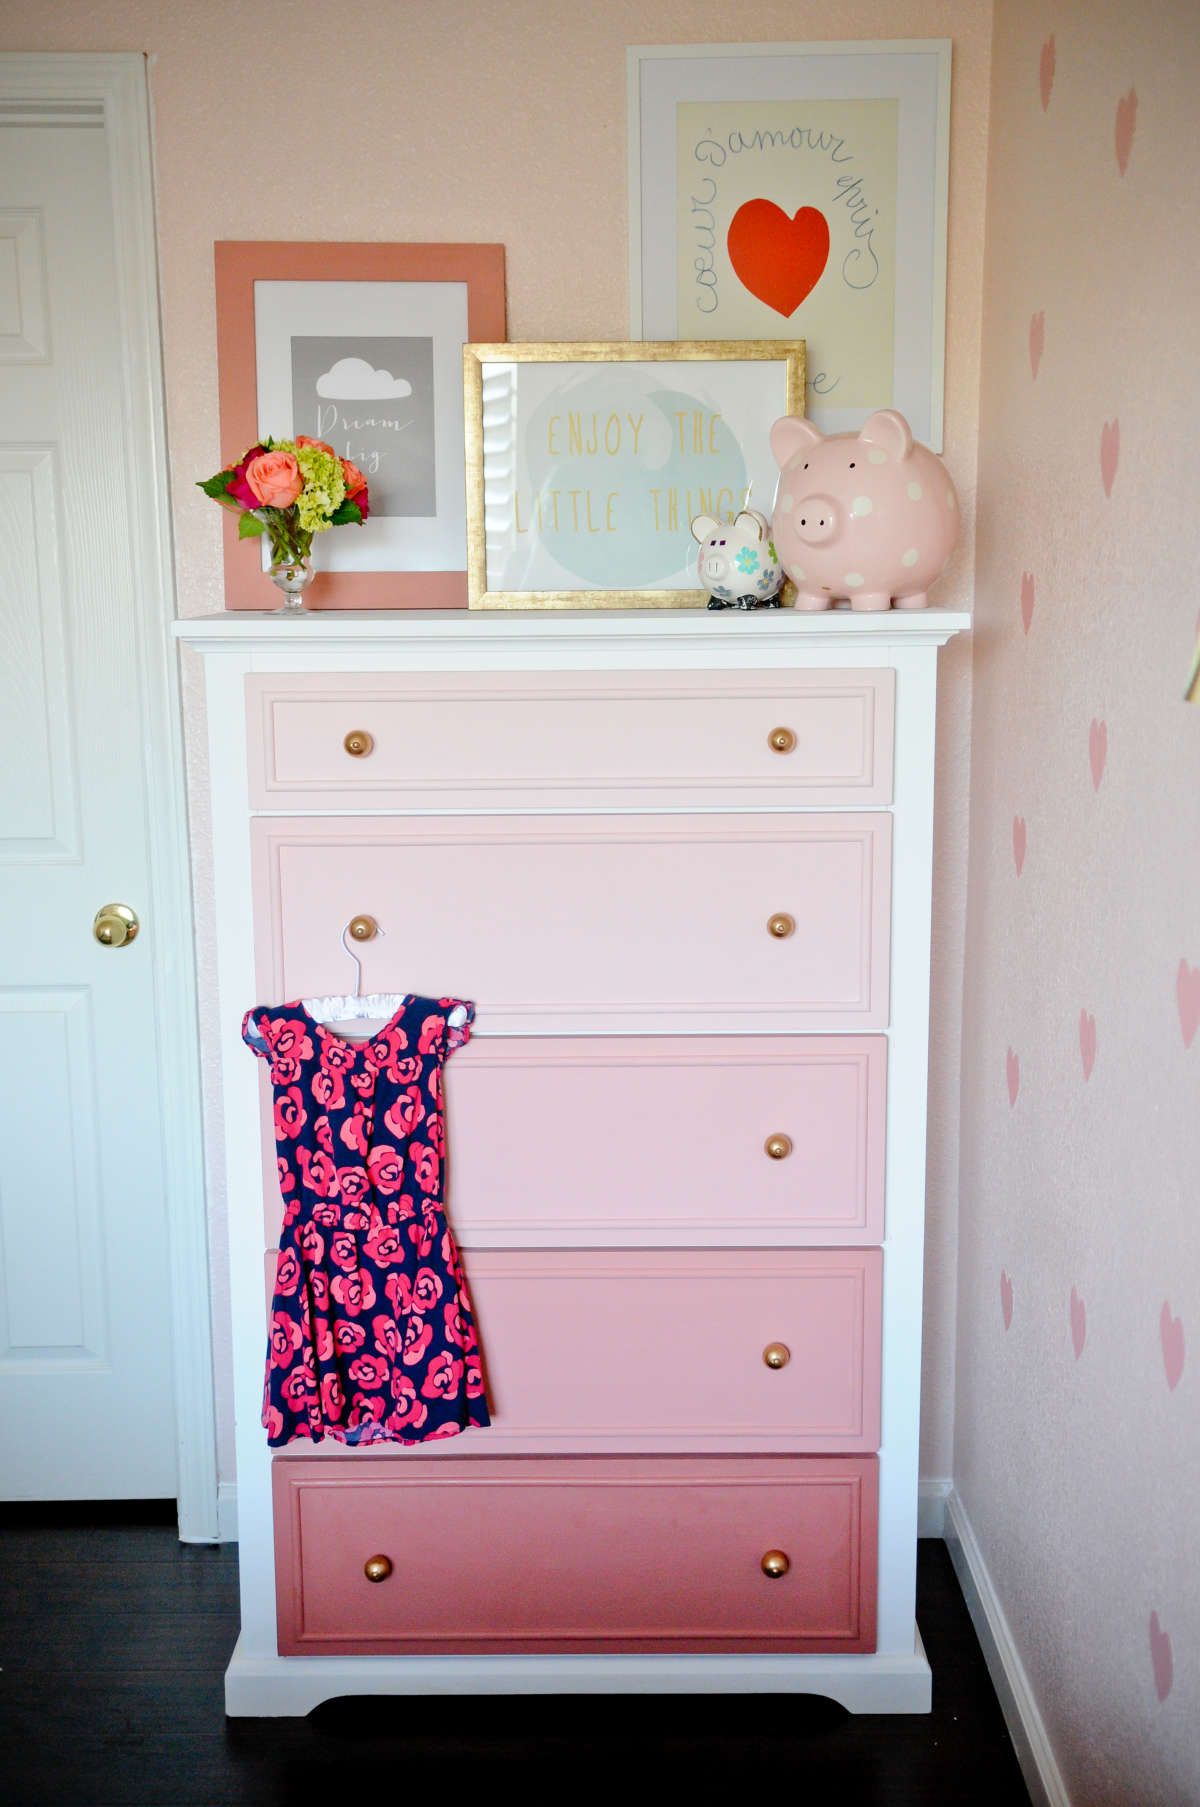 7 DIY Ideas That Will Make Your Kid's Room the Envy of All Their Friends